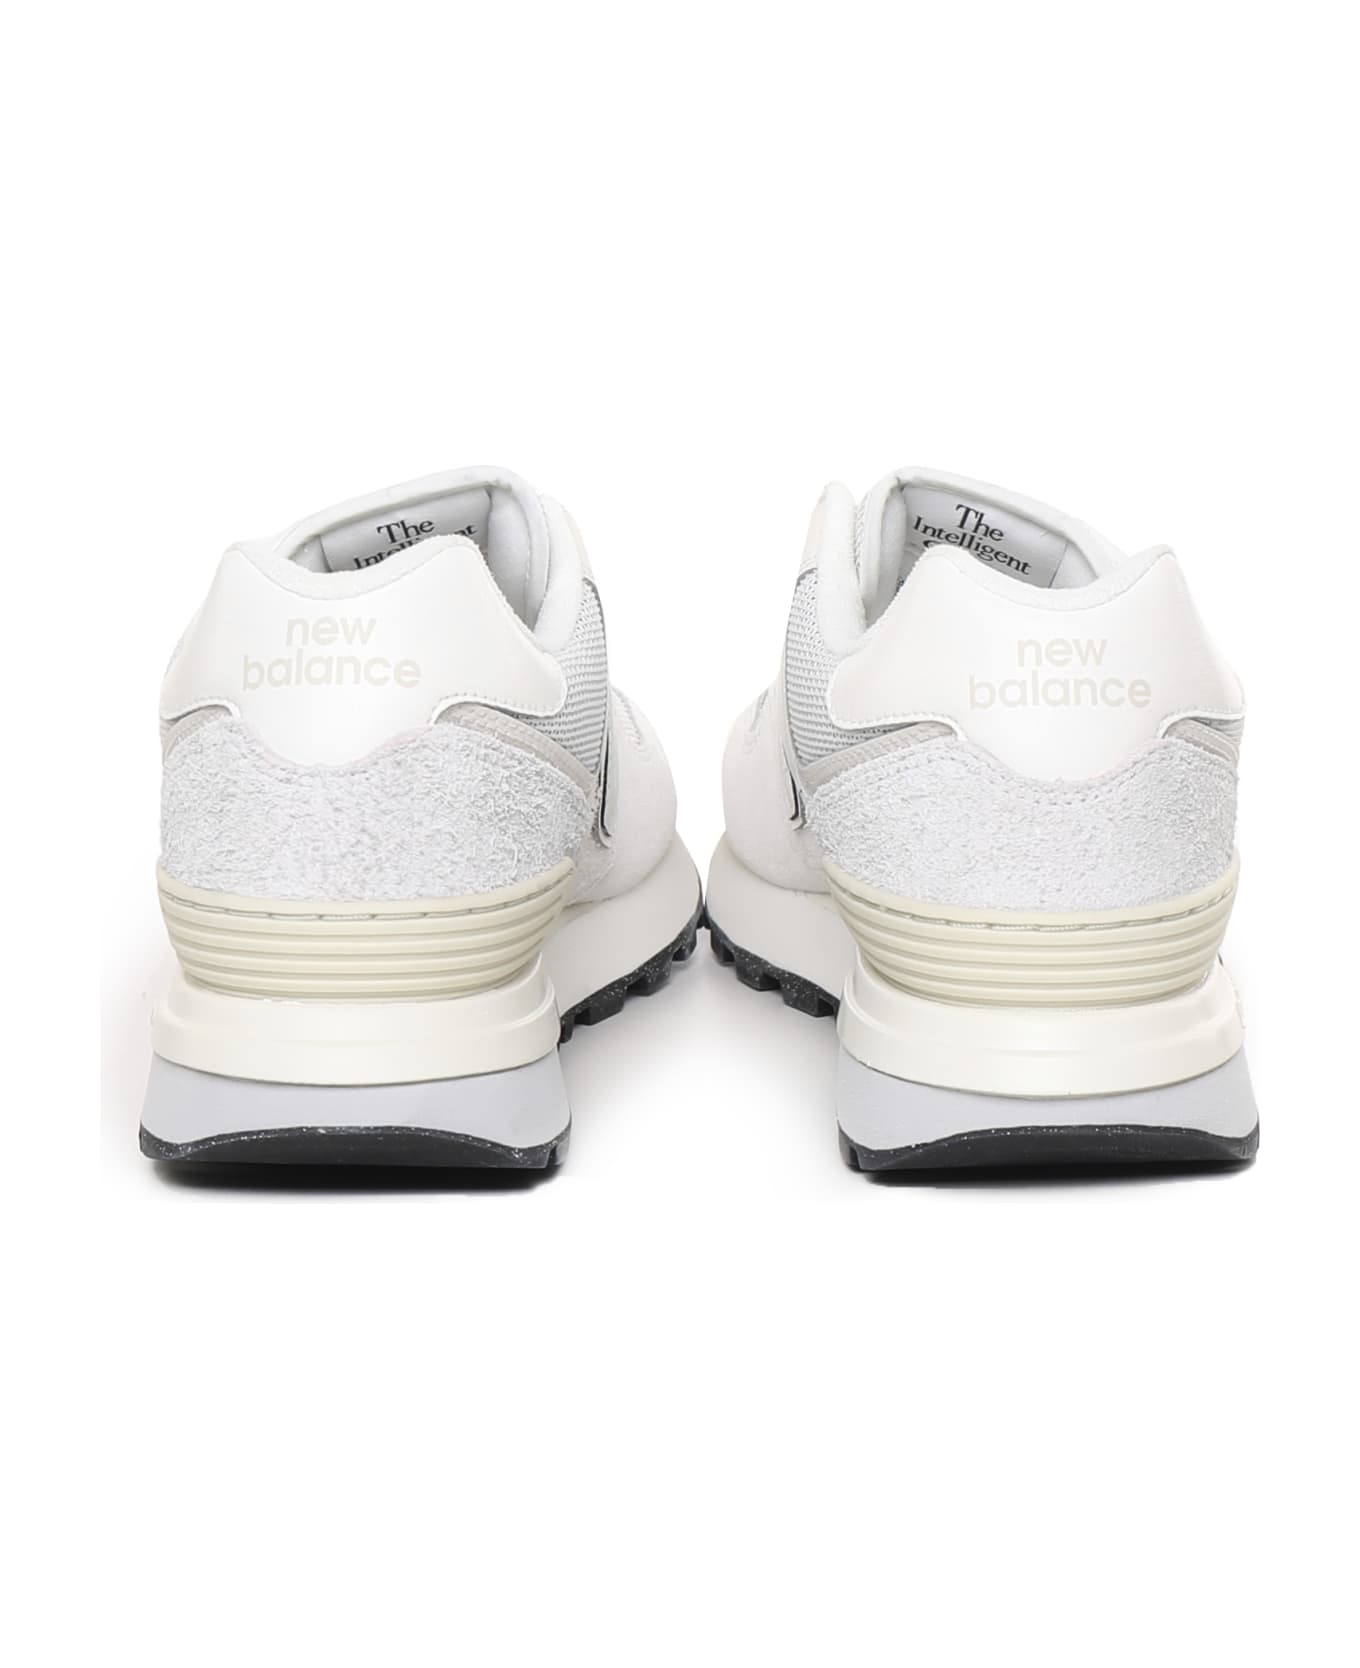 New Balance 574 Sneakers - Reflection スニーカー